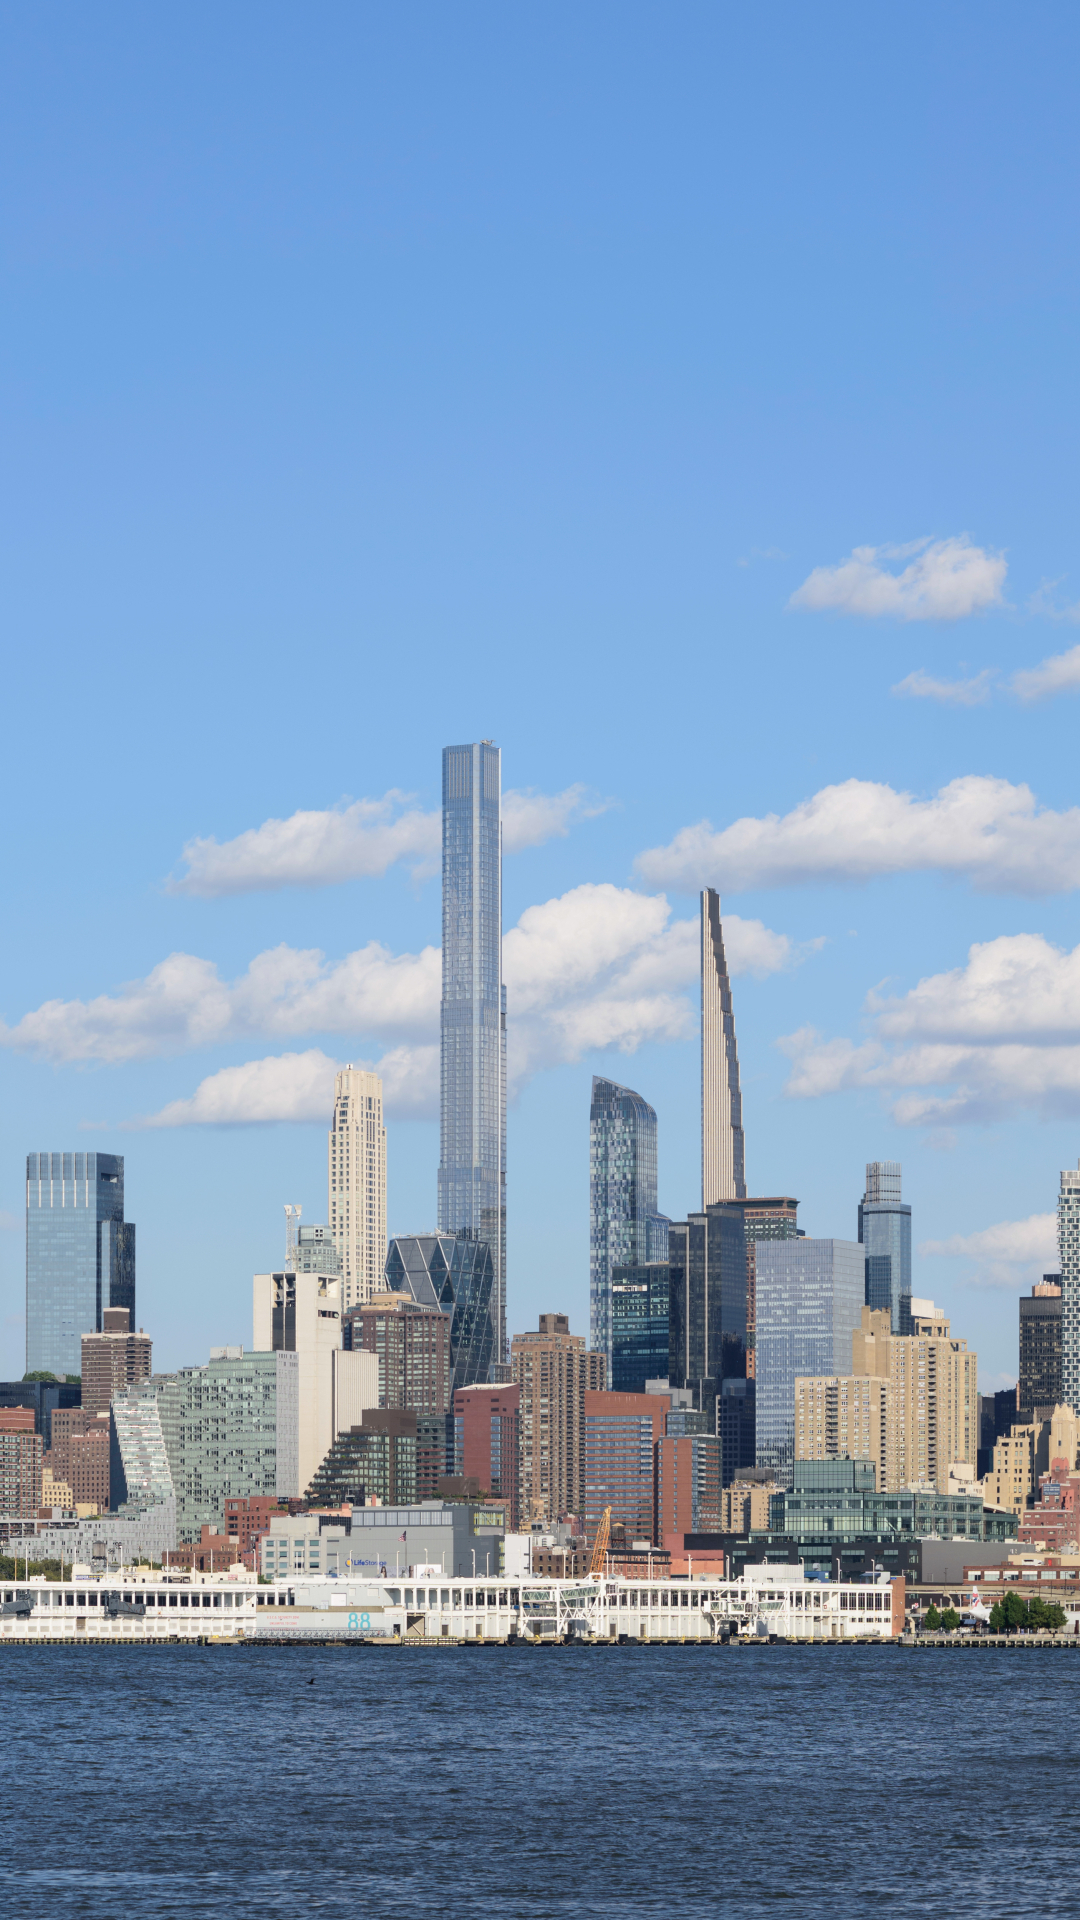 Ten-segment panorama of Midtown Manhattan, New York City, as viewed from Weehawken, New Jersey by King of Hearts